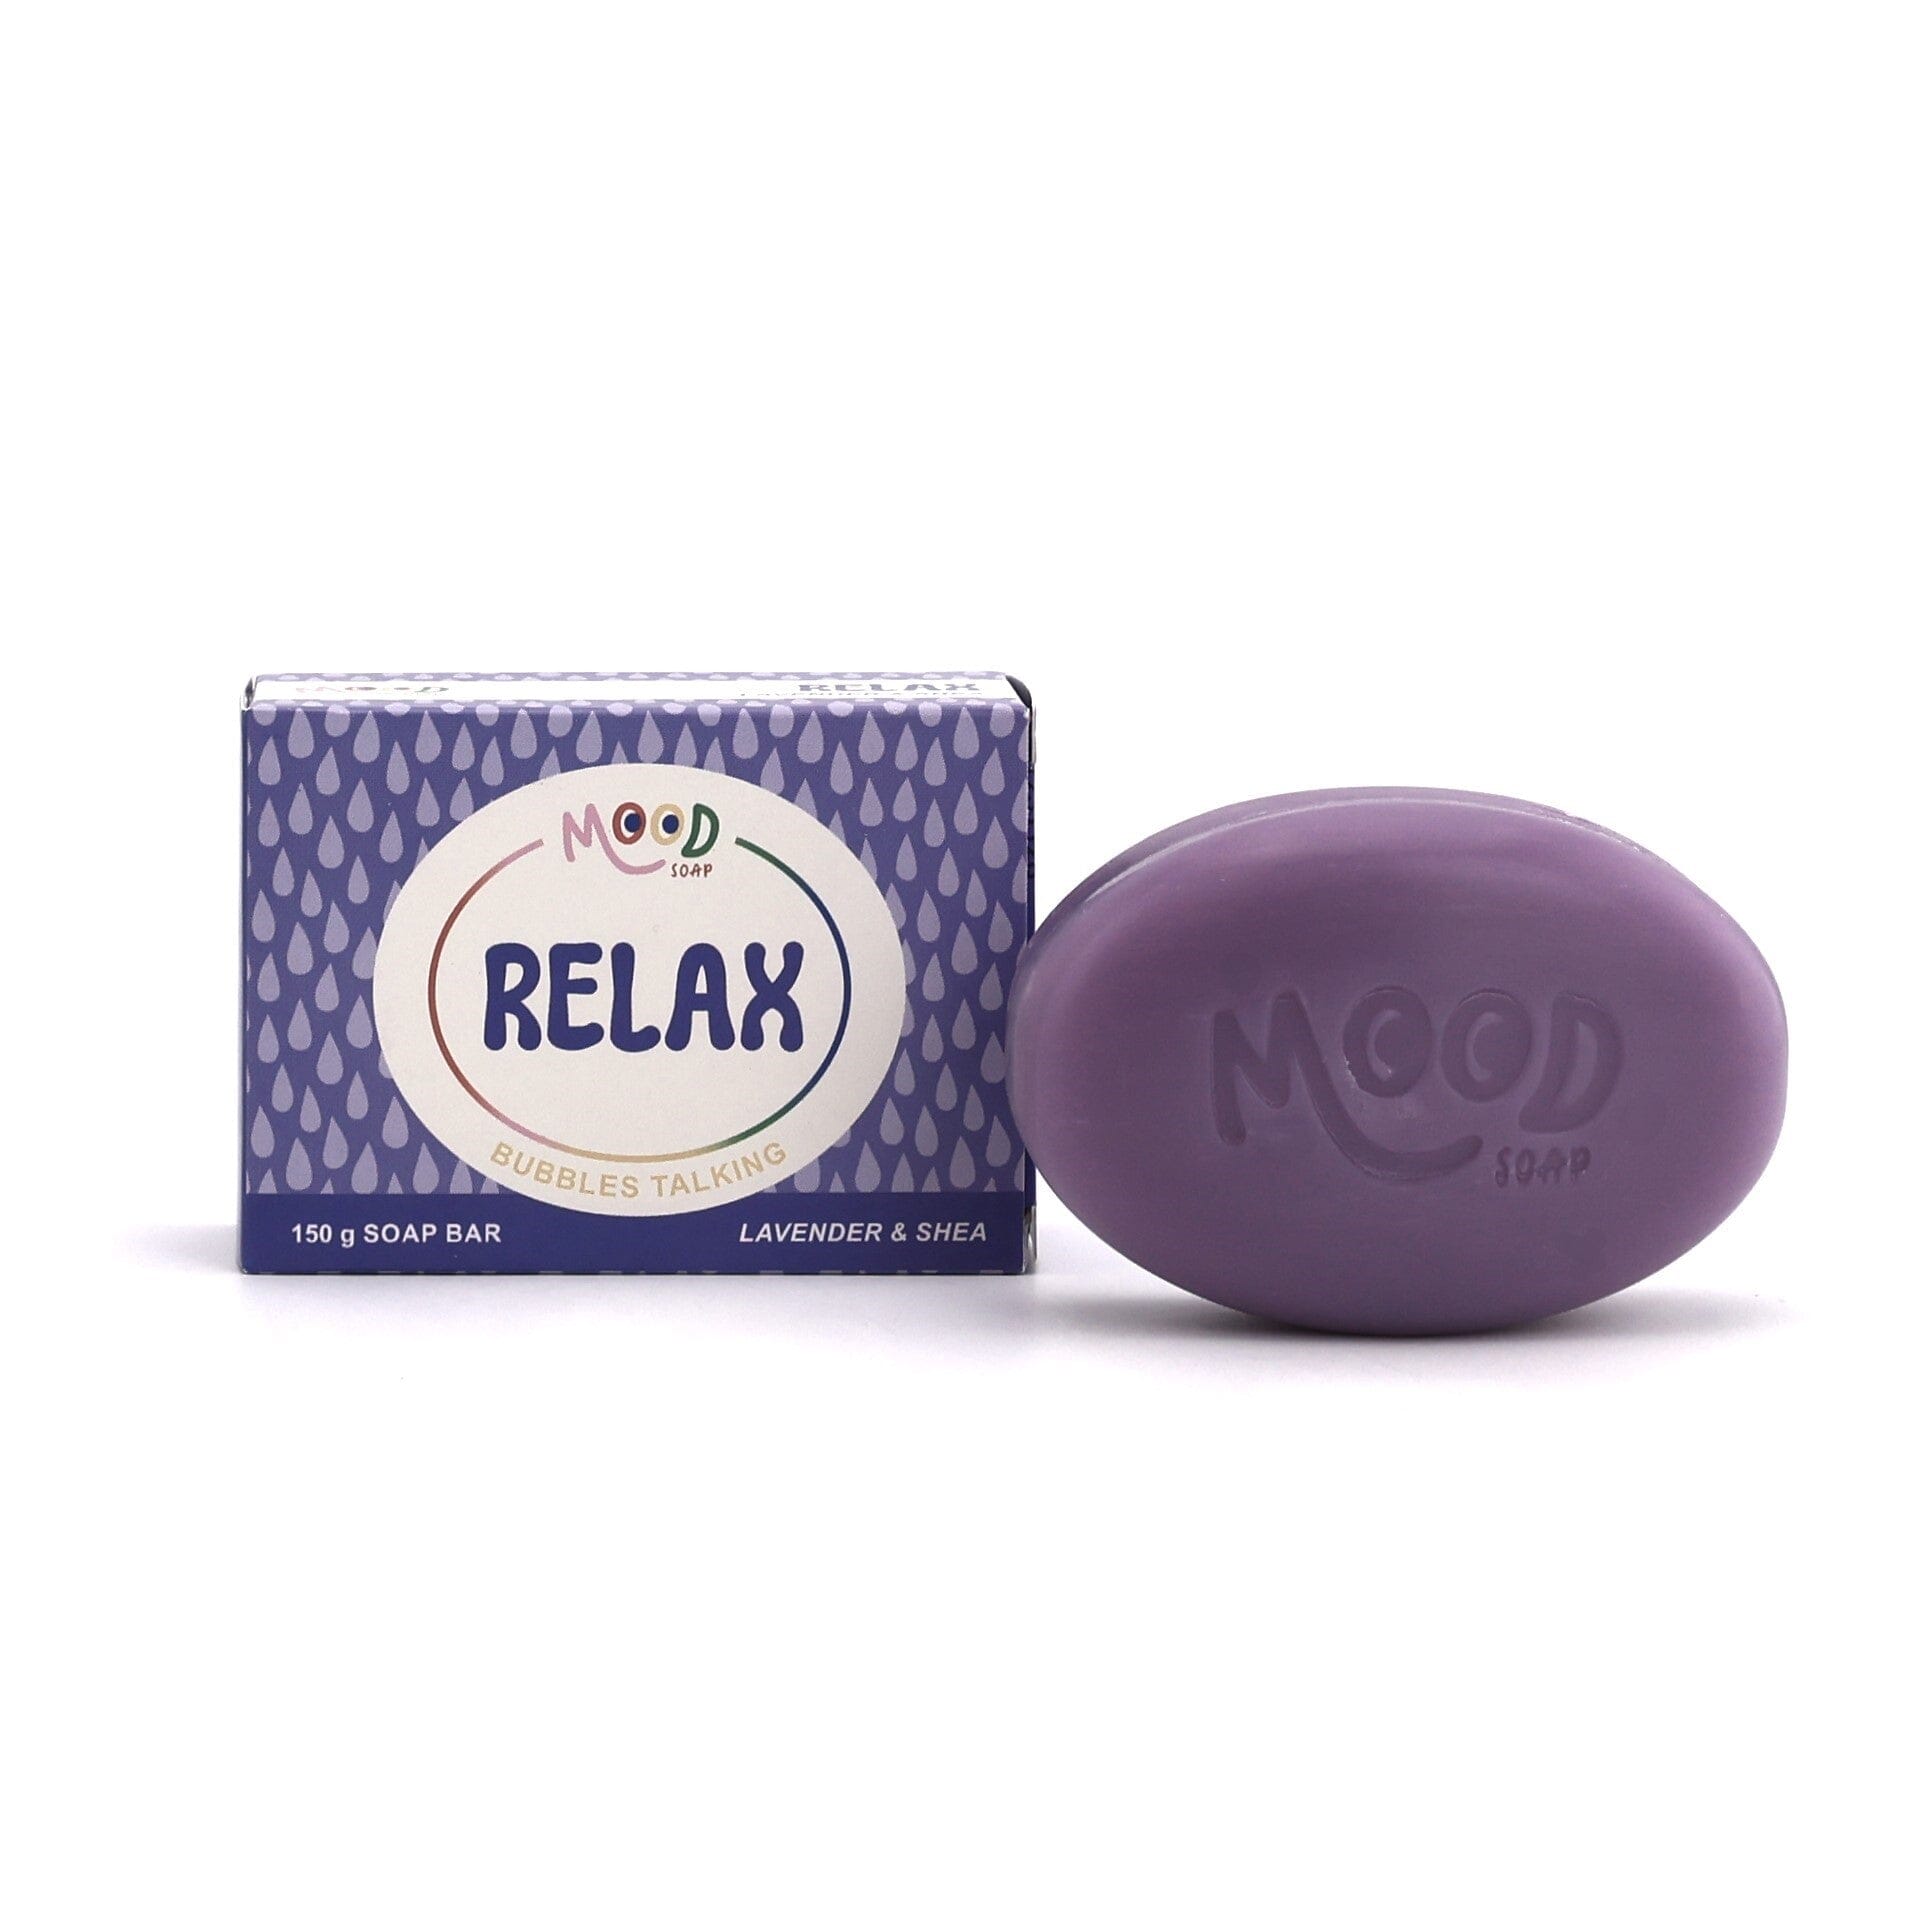 MoodSoap sæbe - Relax, 150g